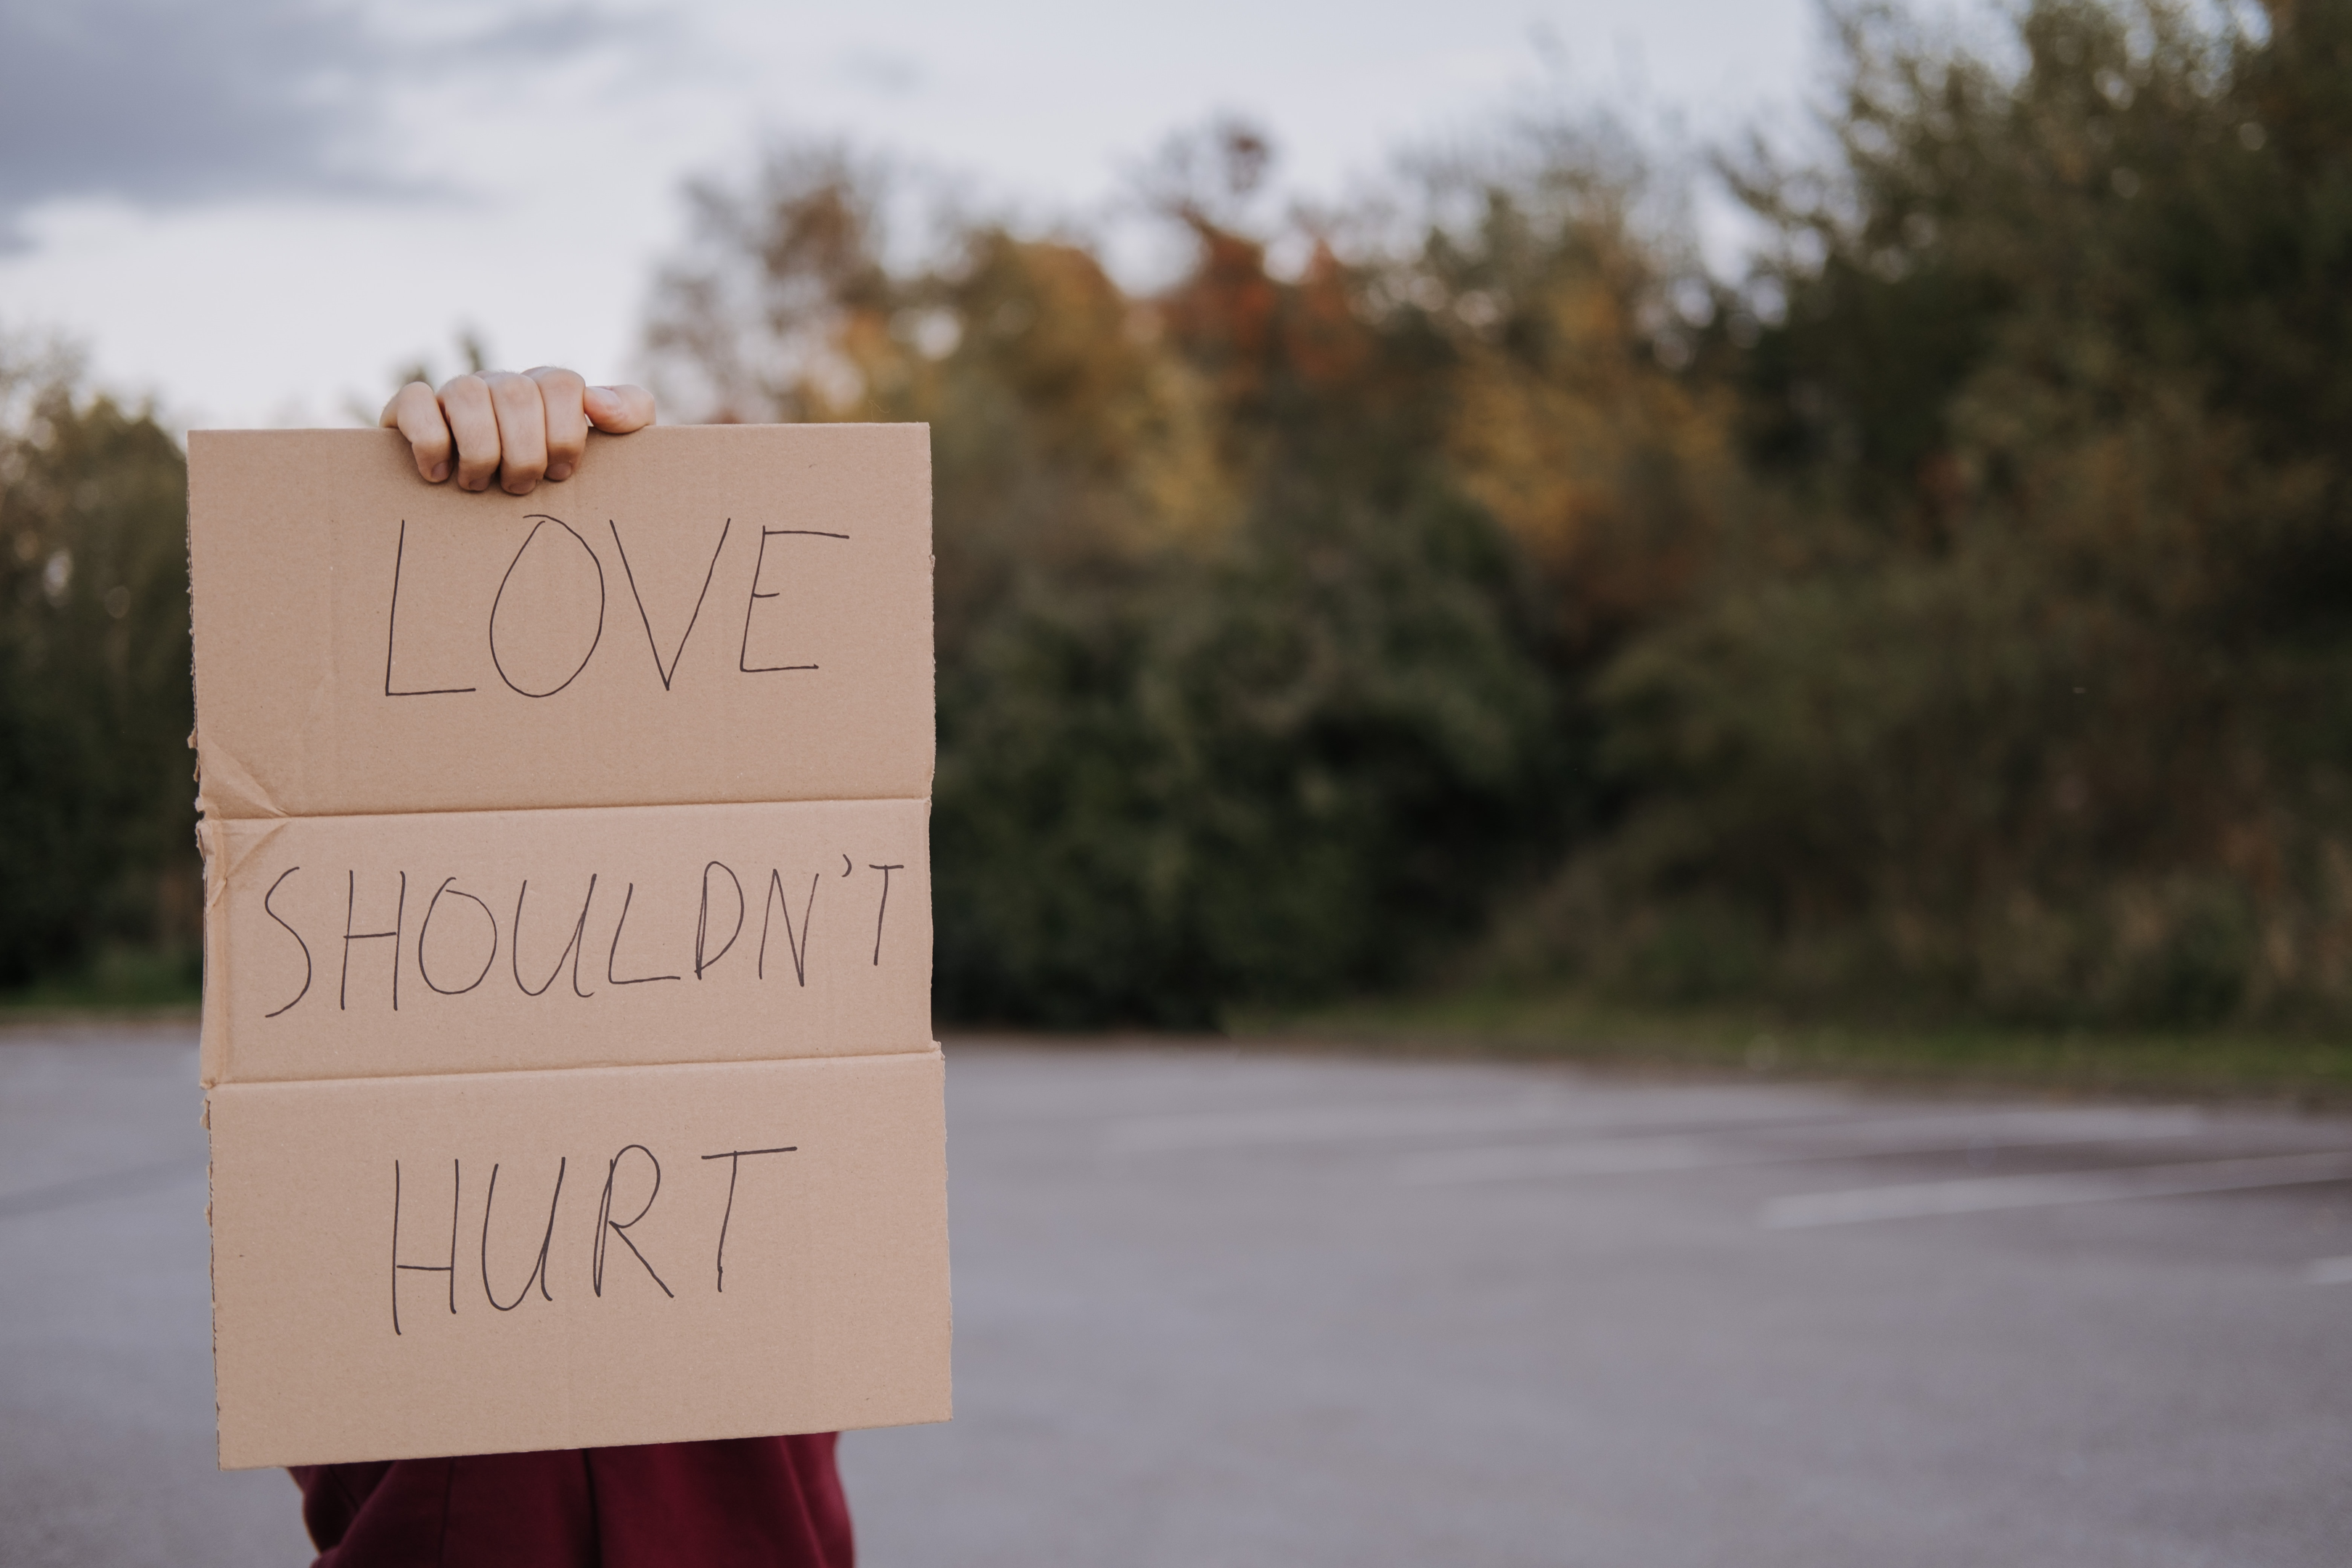 someone holding a cardboard sign that says "Love shouldn't hurt"